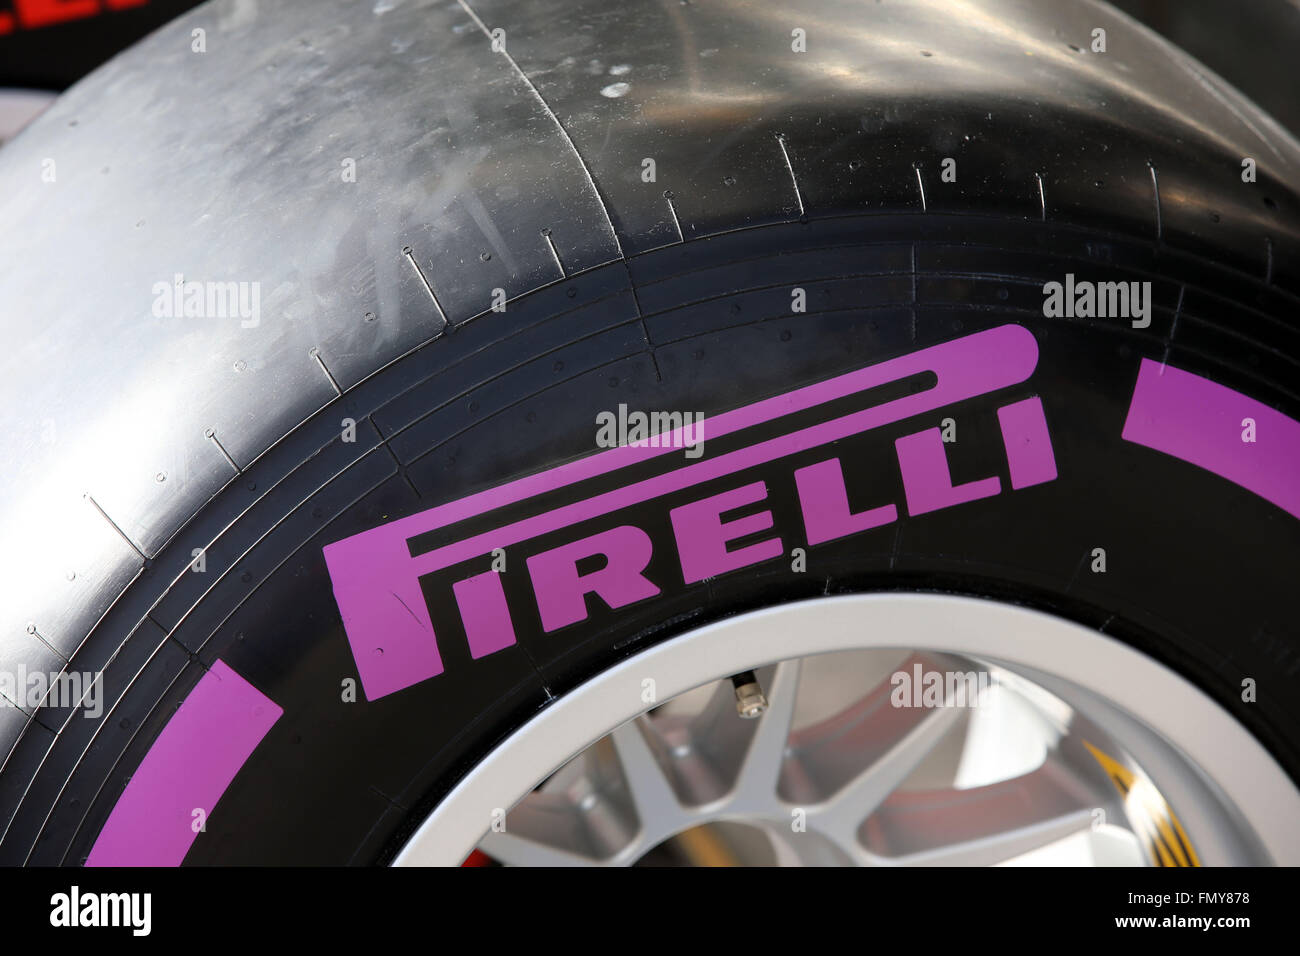 Racing tires from Pirelli seen during the training session for the upcoming Formula One season at the Circuit de Barcelona - Catalunya in Barcelona, Spain, 23 February 2016. Photo: Jens Buettner/dpa Stock Photo